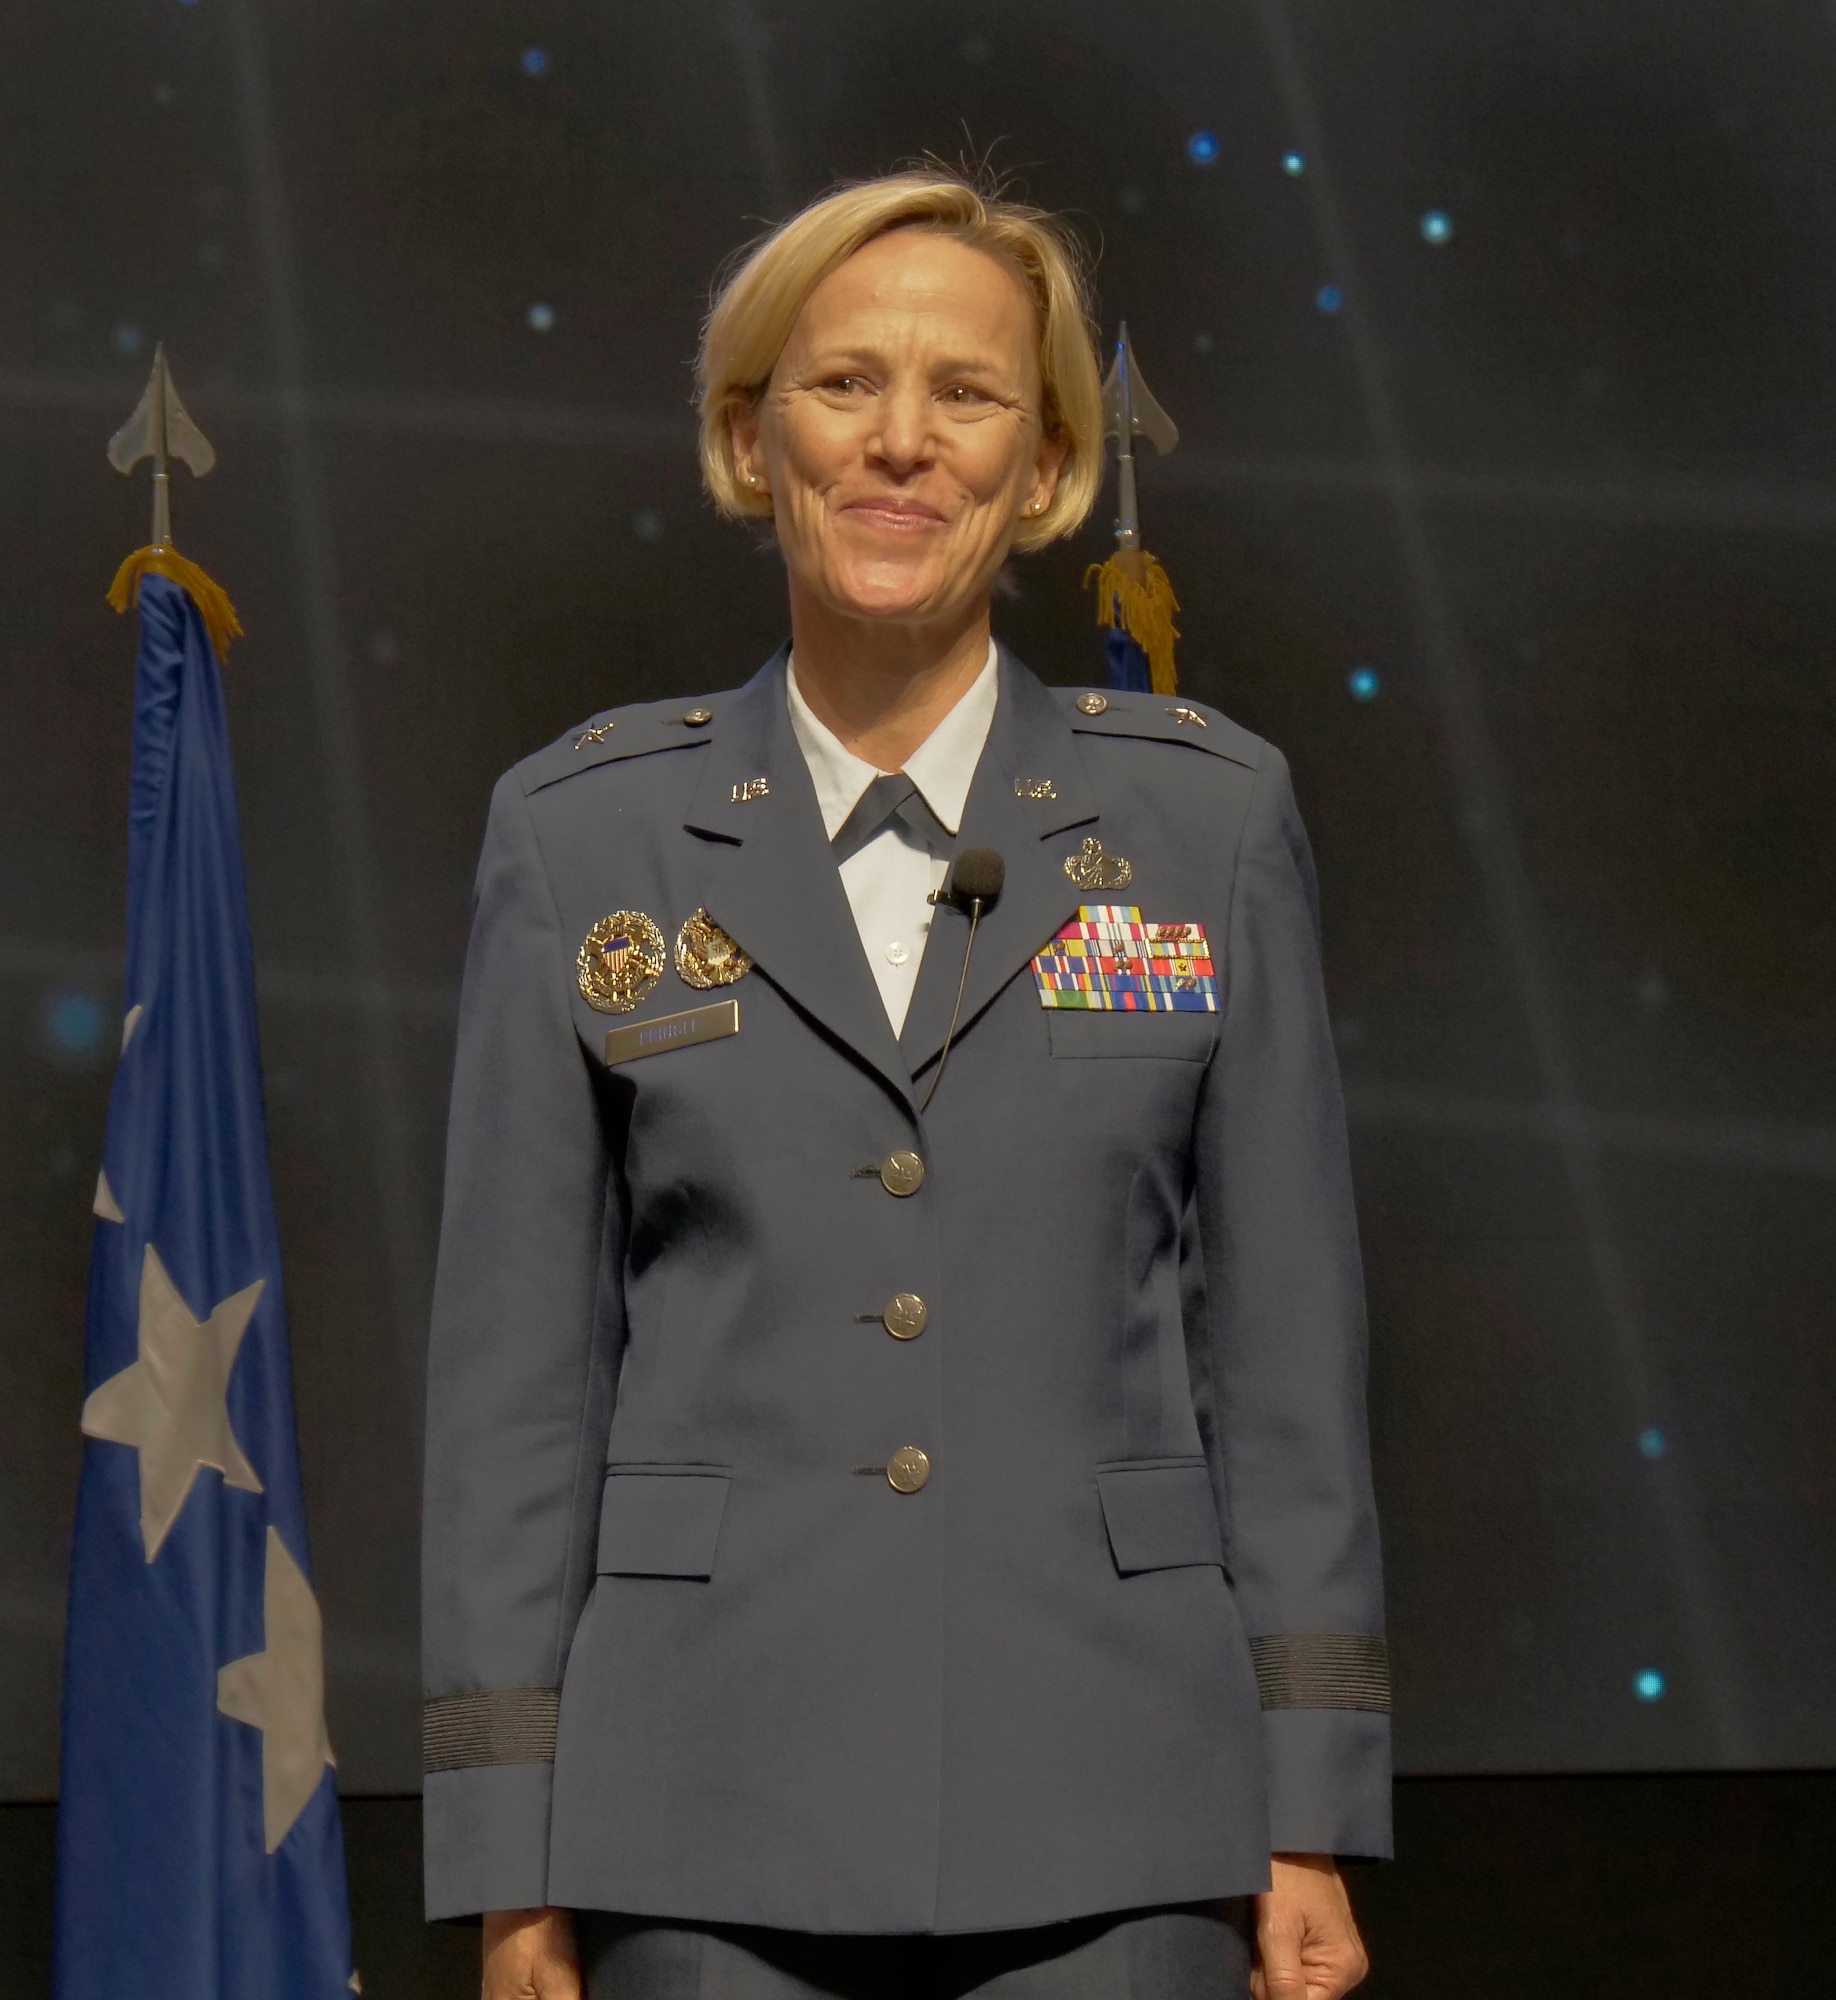 Brig. Gen. Heather Pringle, who assumed command of the Air Force Research Laboratory at the ceremony pictured here in June 2020, encouraged change as she shared her unique perspective in a chat she gave March 29, 2021 for Women’s History Month and International Women’s Day. (U.S. Air Force photo/Keith Lewis)